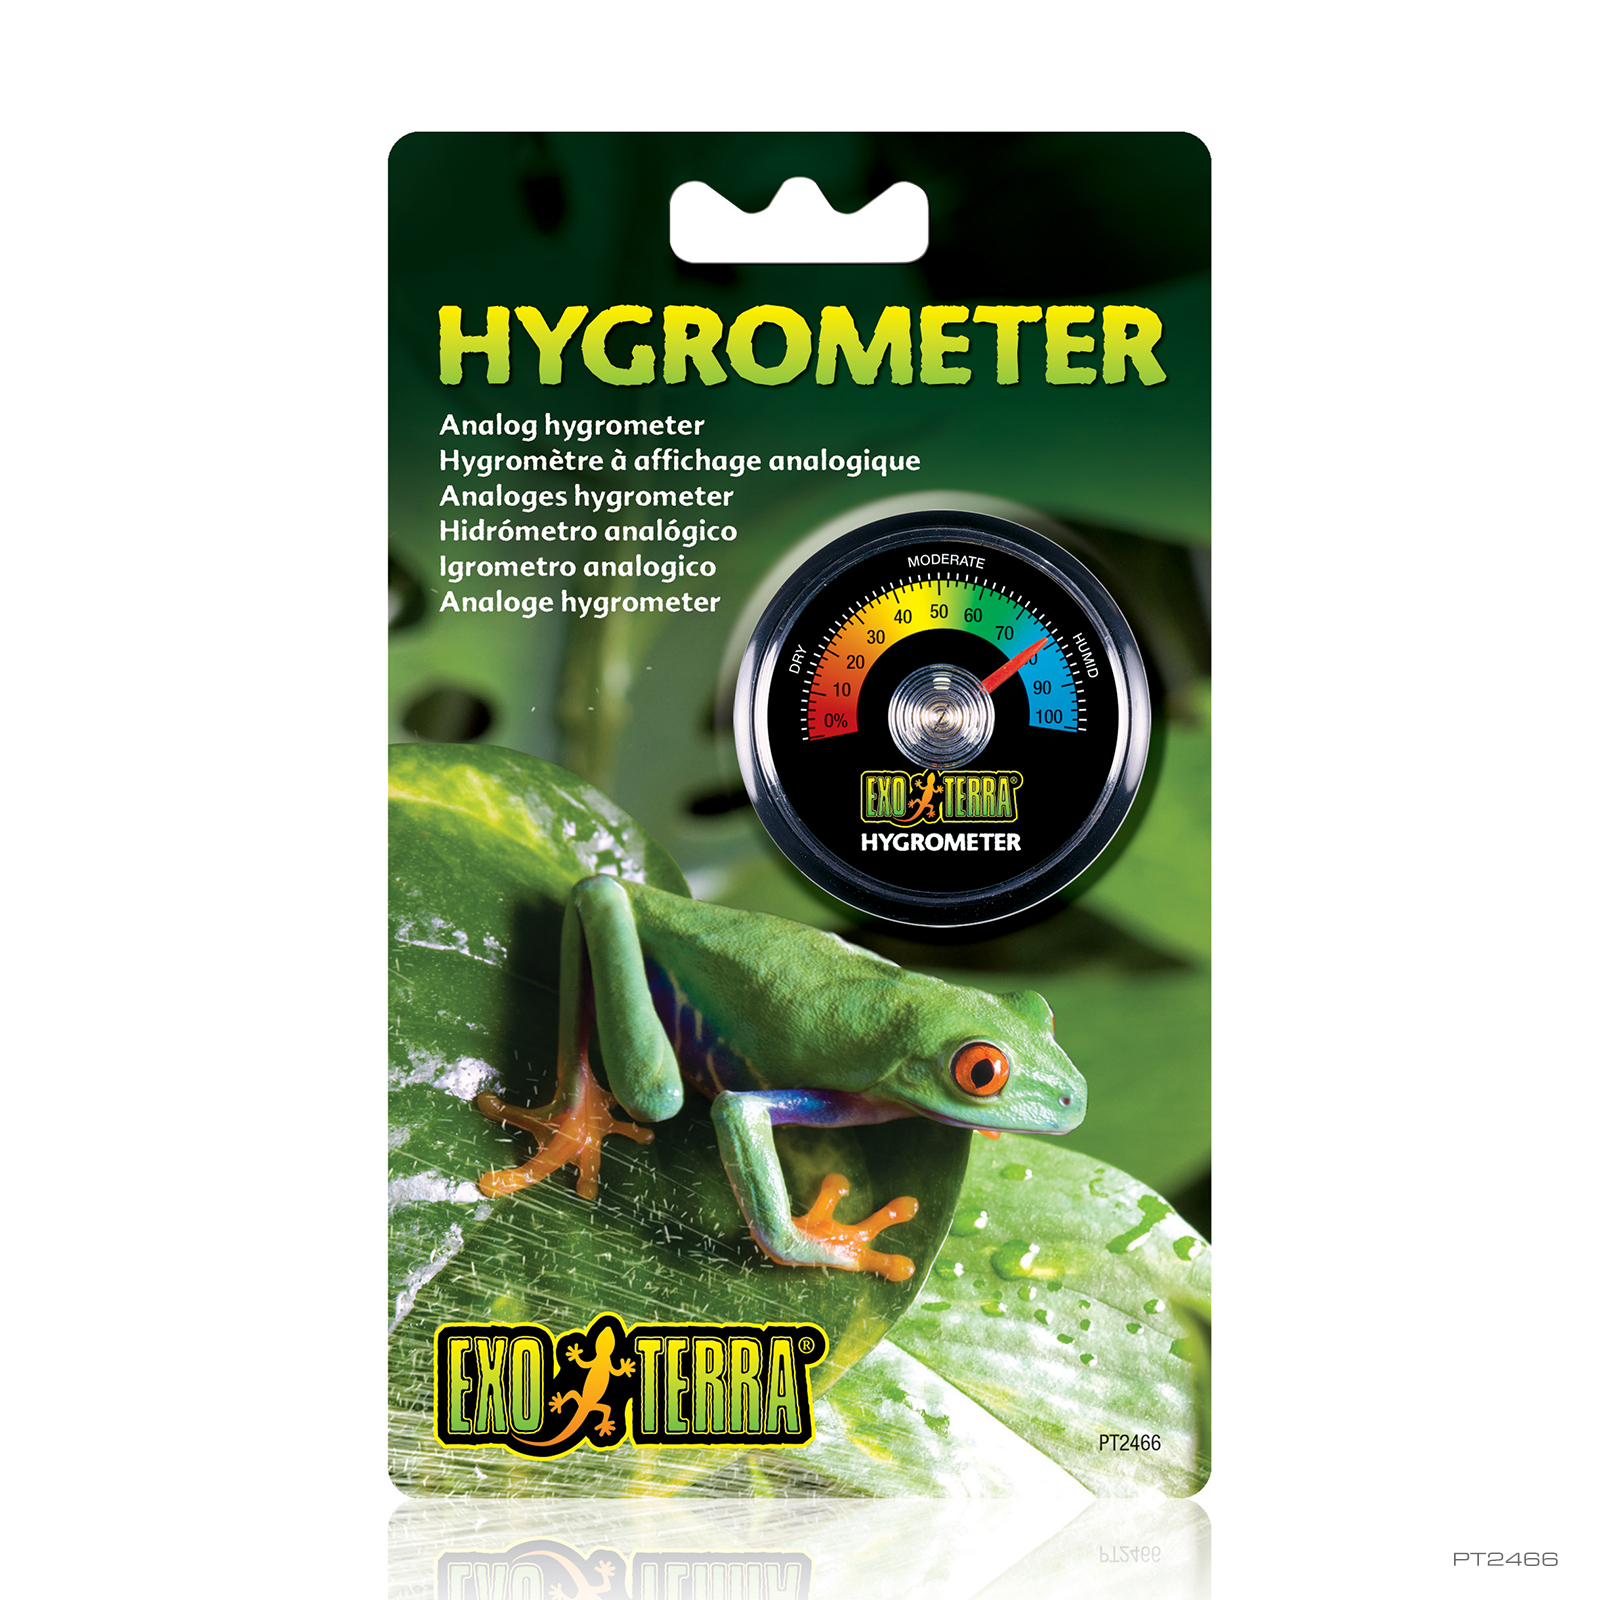 The hygrometer, an important element in the terrarium